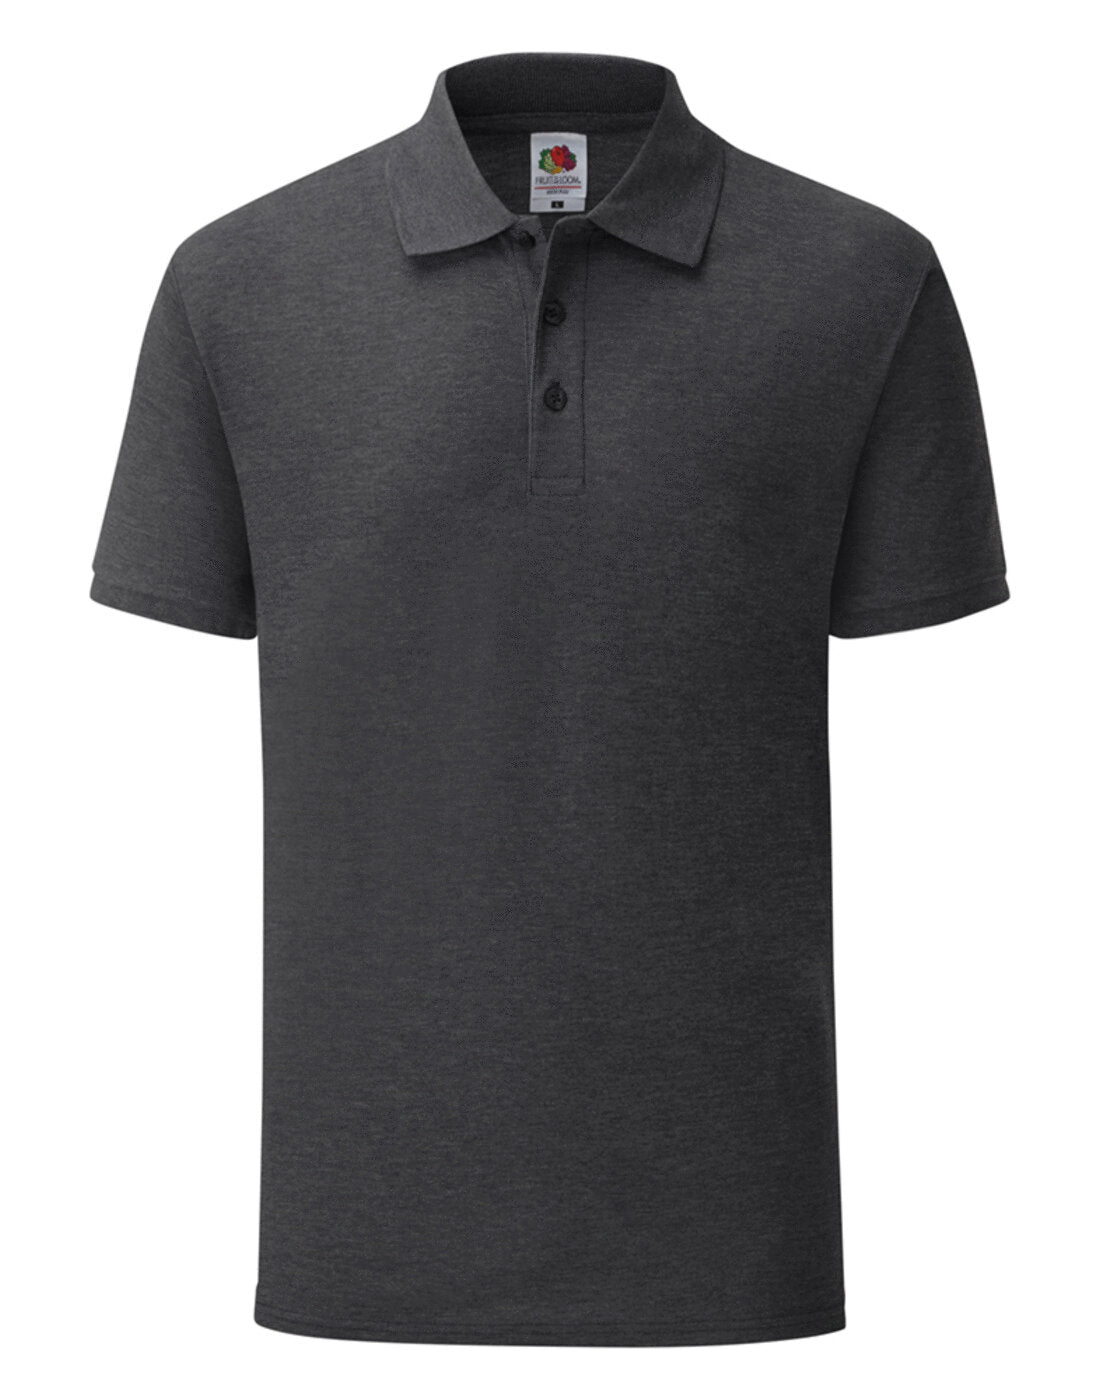 Fruit of the Loom 65/35 Tailored Fit Polo - Dark Heather